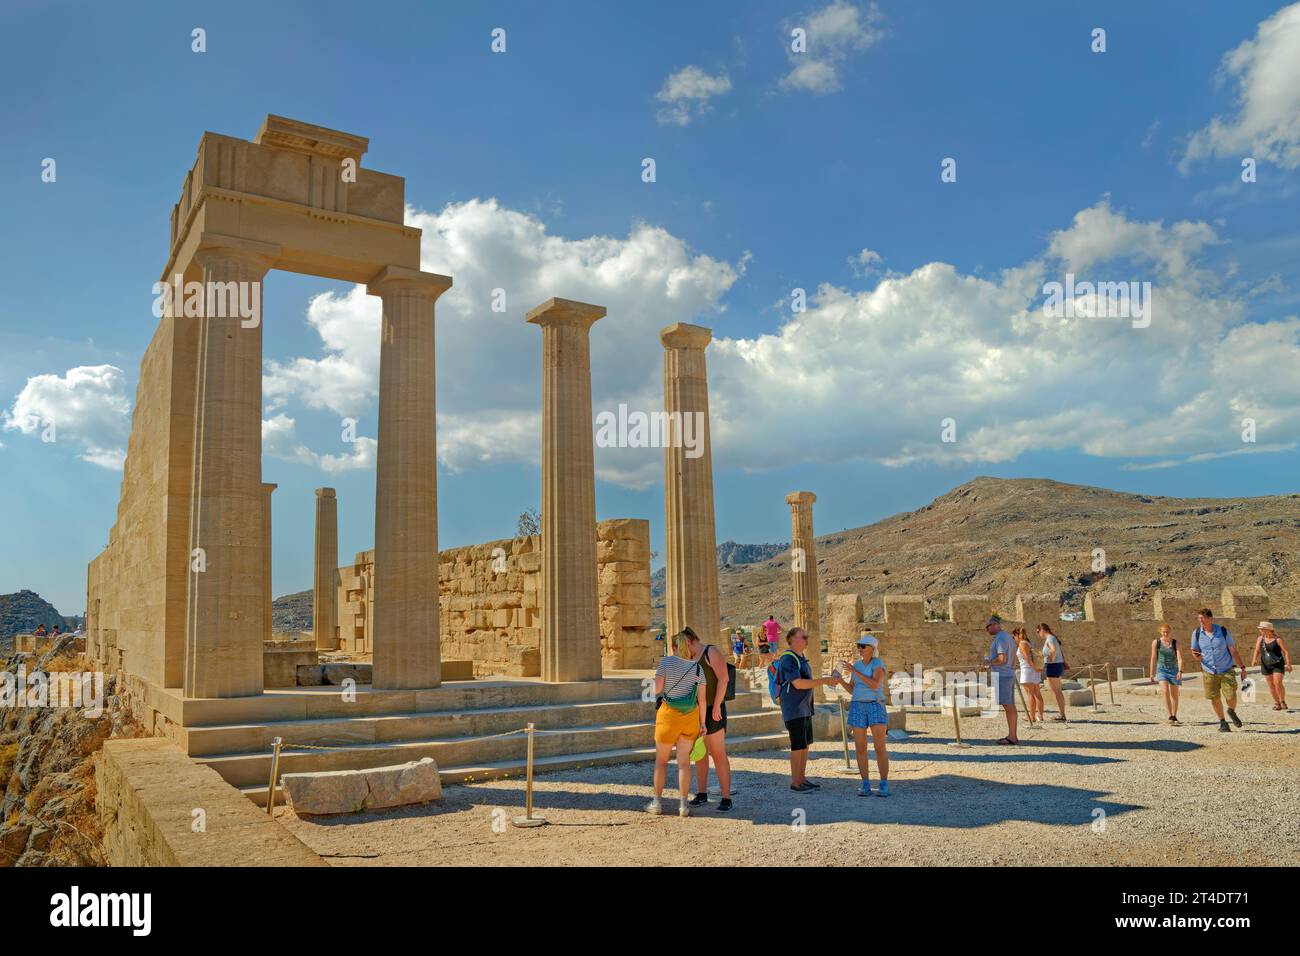 The temple of Athena Lindia, part of the Acropolis of Lindos on the island of Rhodes, Greece. Stock Photo